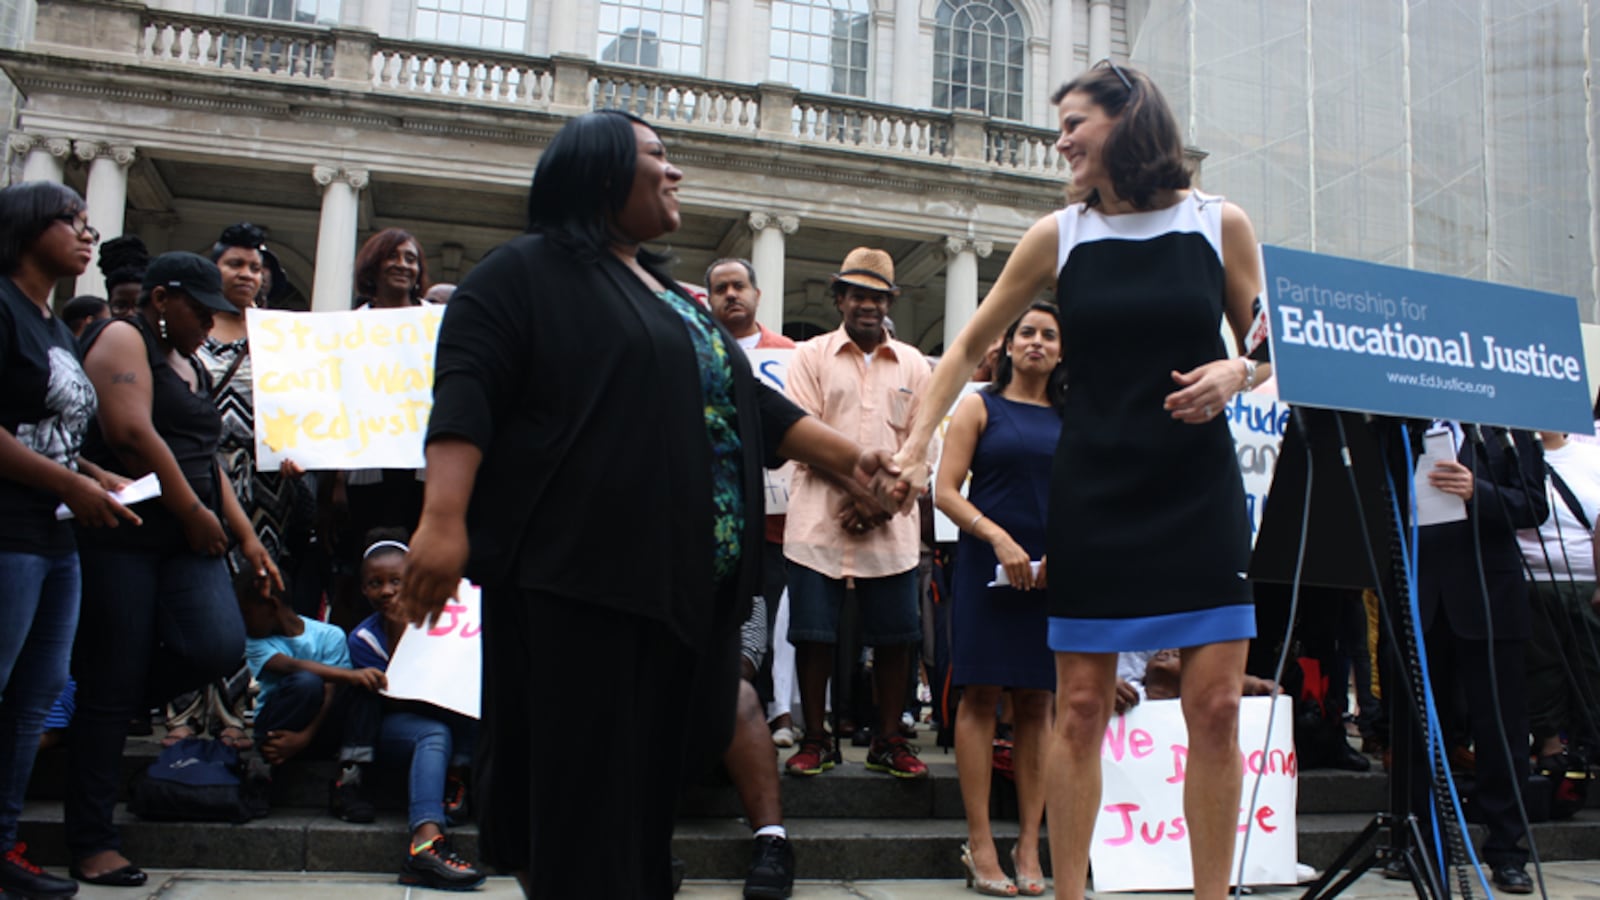 Carla Williams (left) is one of seven plaintiffs  suing the state over teacher tenure laws. The efforts are led by news-anchor-turned-education-activist Campbell Brown (right).